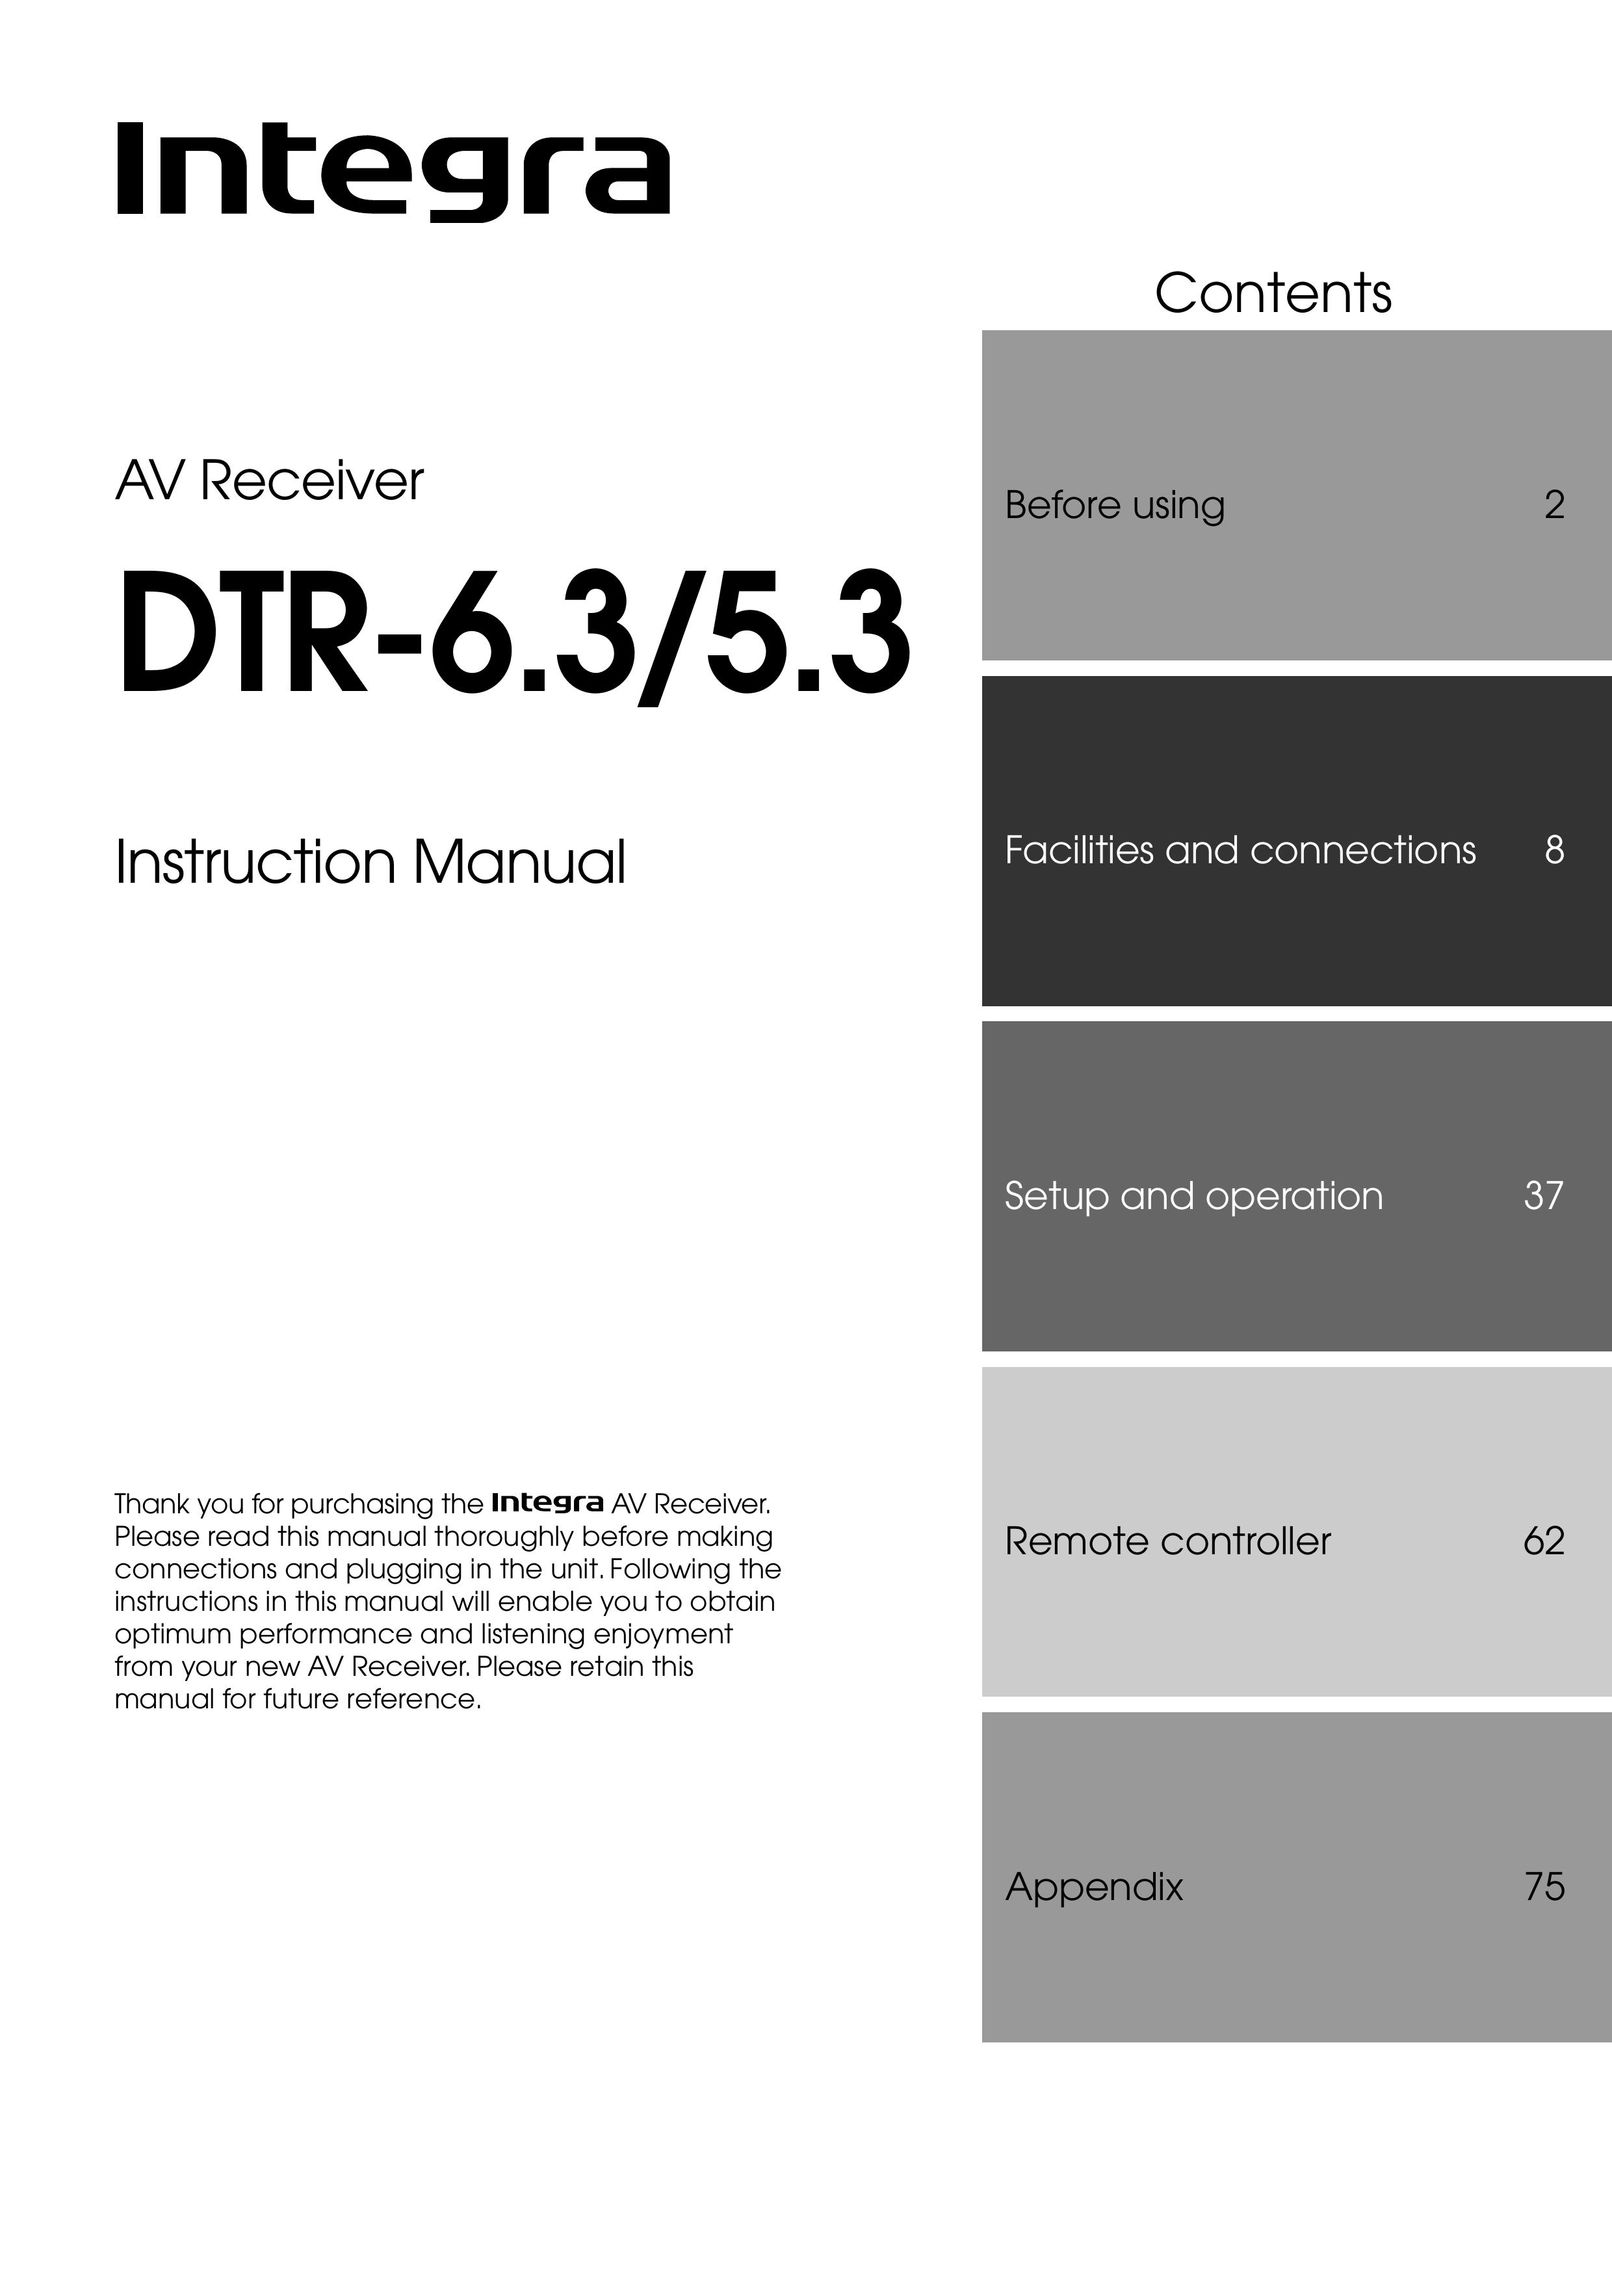 Integra DTR-5.3 Stereo Receiver User Manual (Page 1)